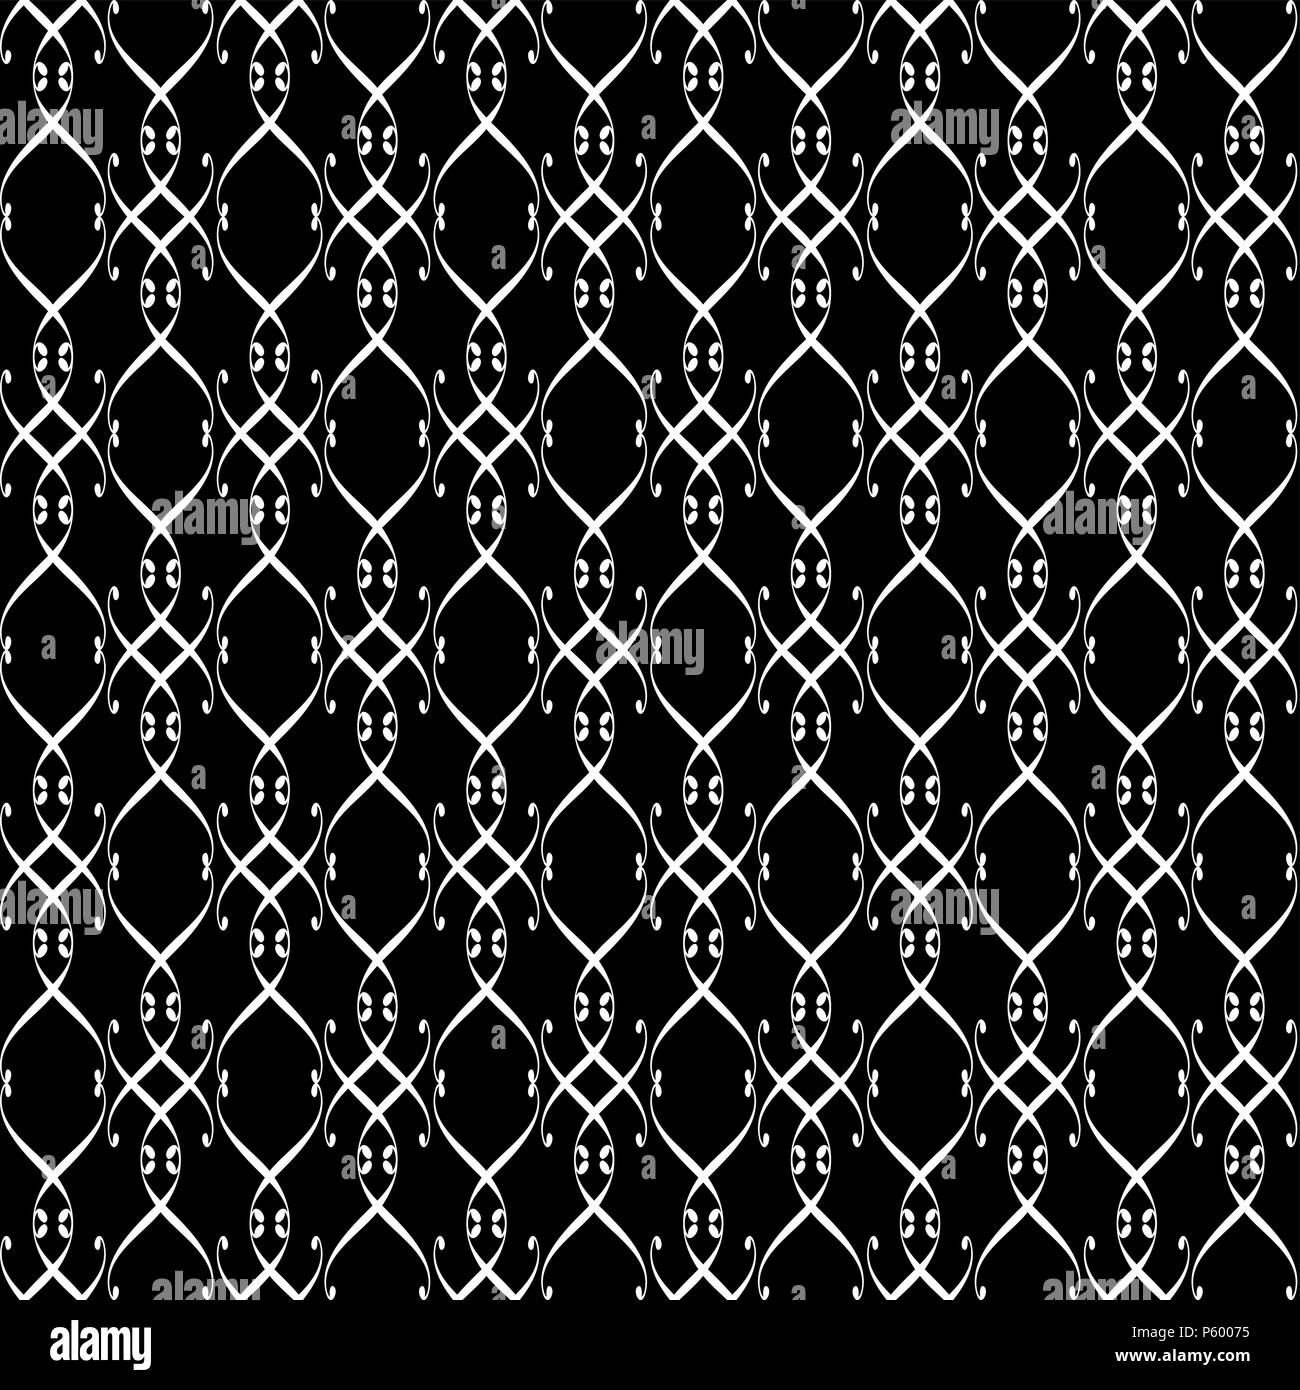 Black and white lacy pattern with lines Stock Vector